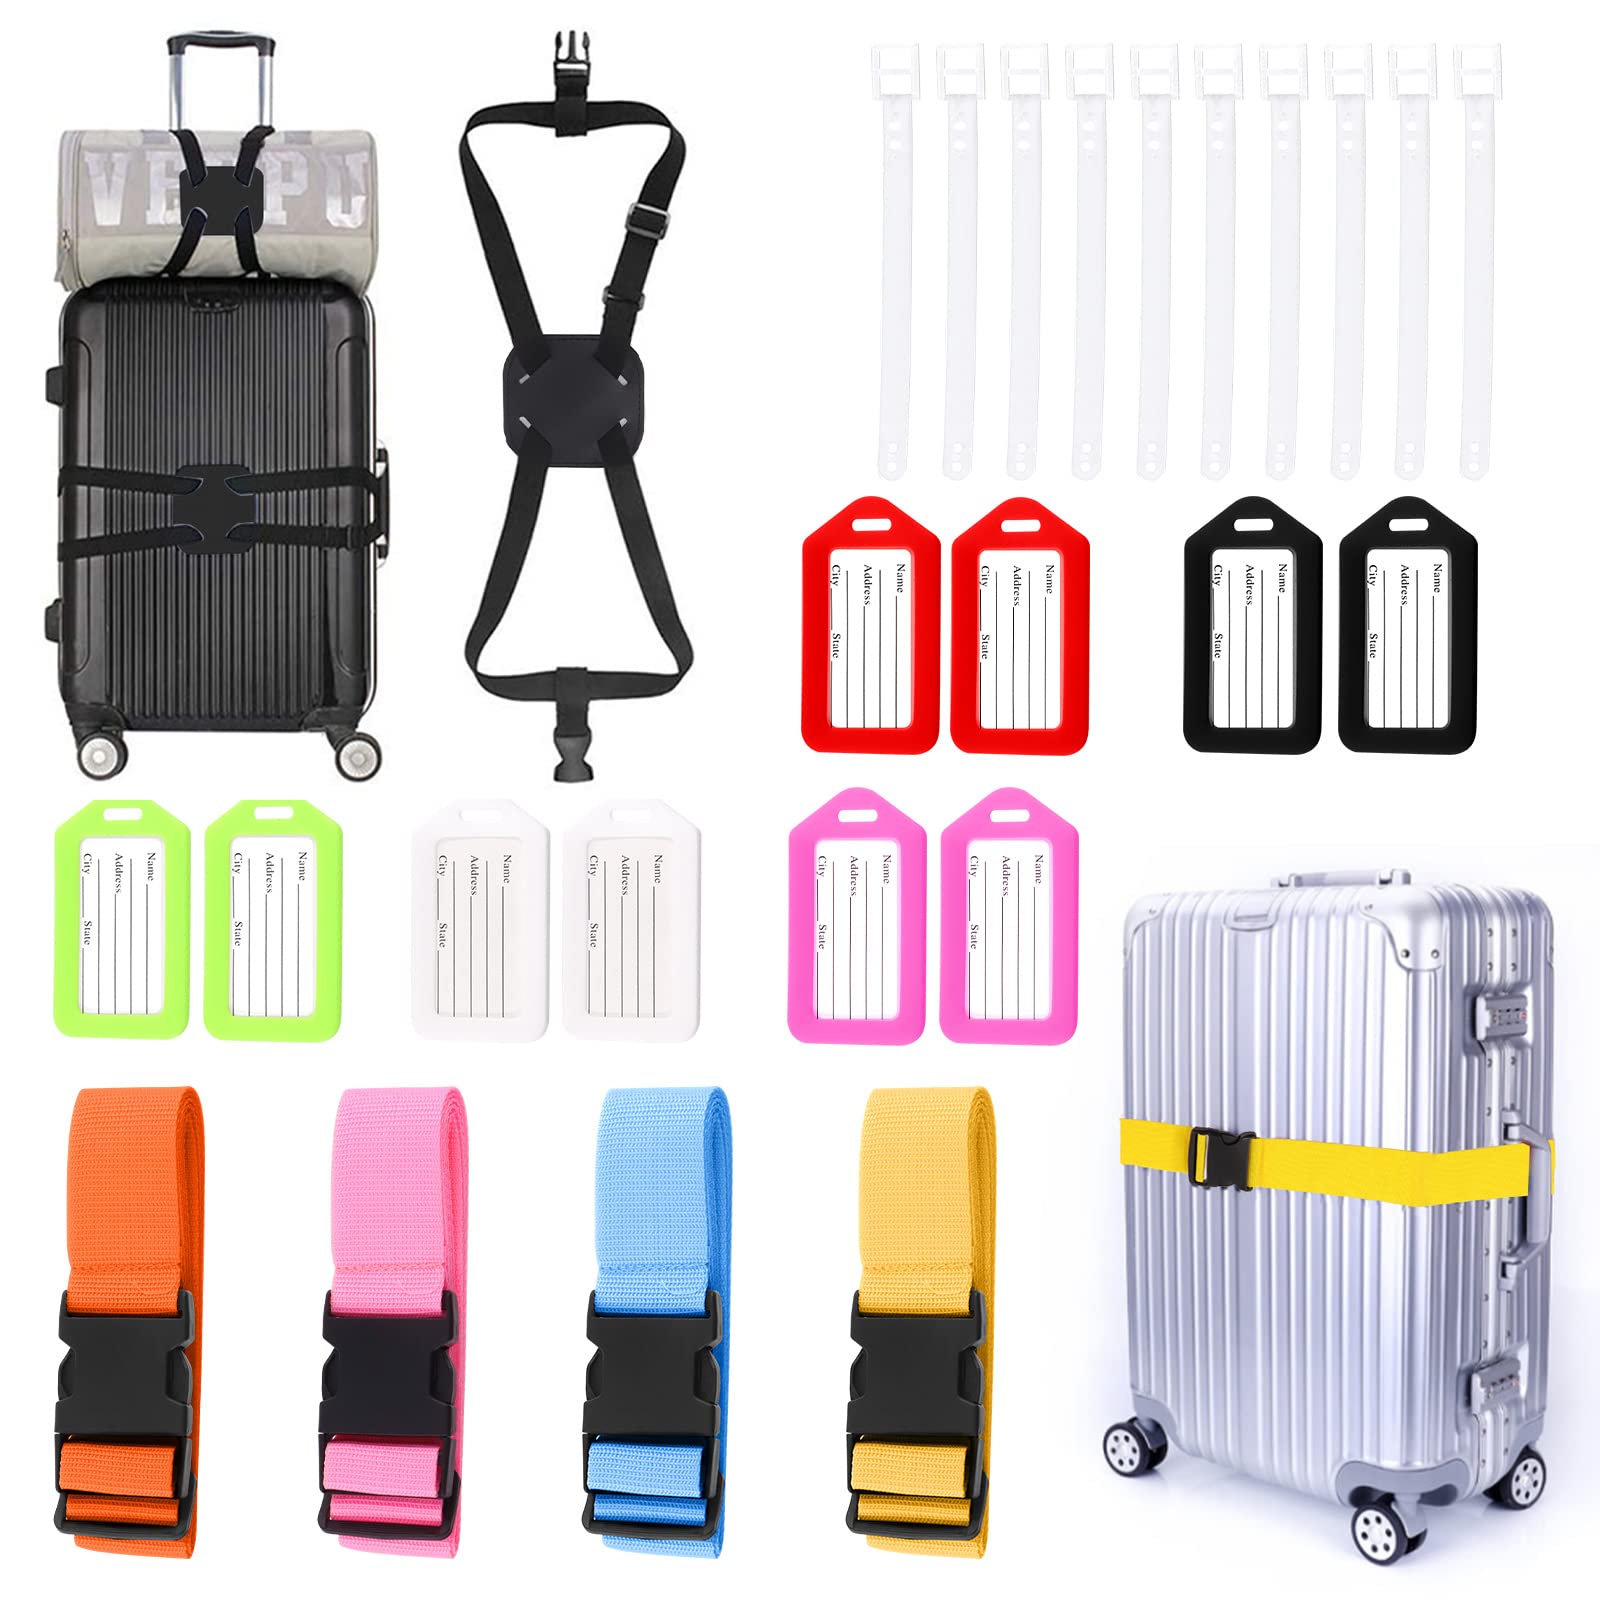 Mardatt 25Pcs Suitcase Accessories for Travel Includes 4 Colors Luggage Straps, Plastic Luggage Tags with Lanyard, Add a Bag Luggage Straps Travel Accessories for Traveling (Assorted Colors) von Mardatt